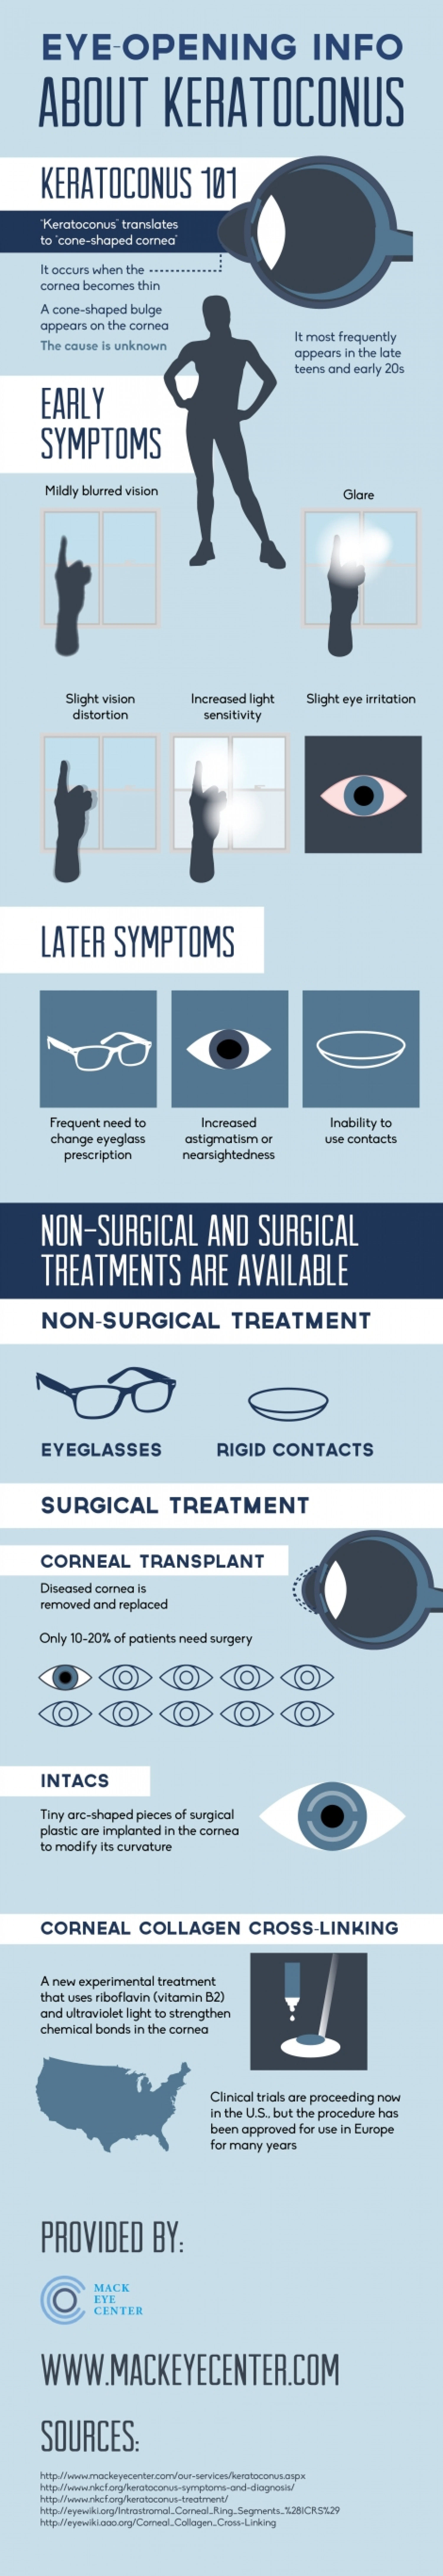 Eye-Opening Info about Keratoconus  Infographic